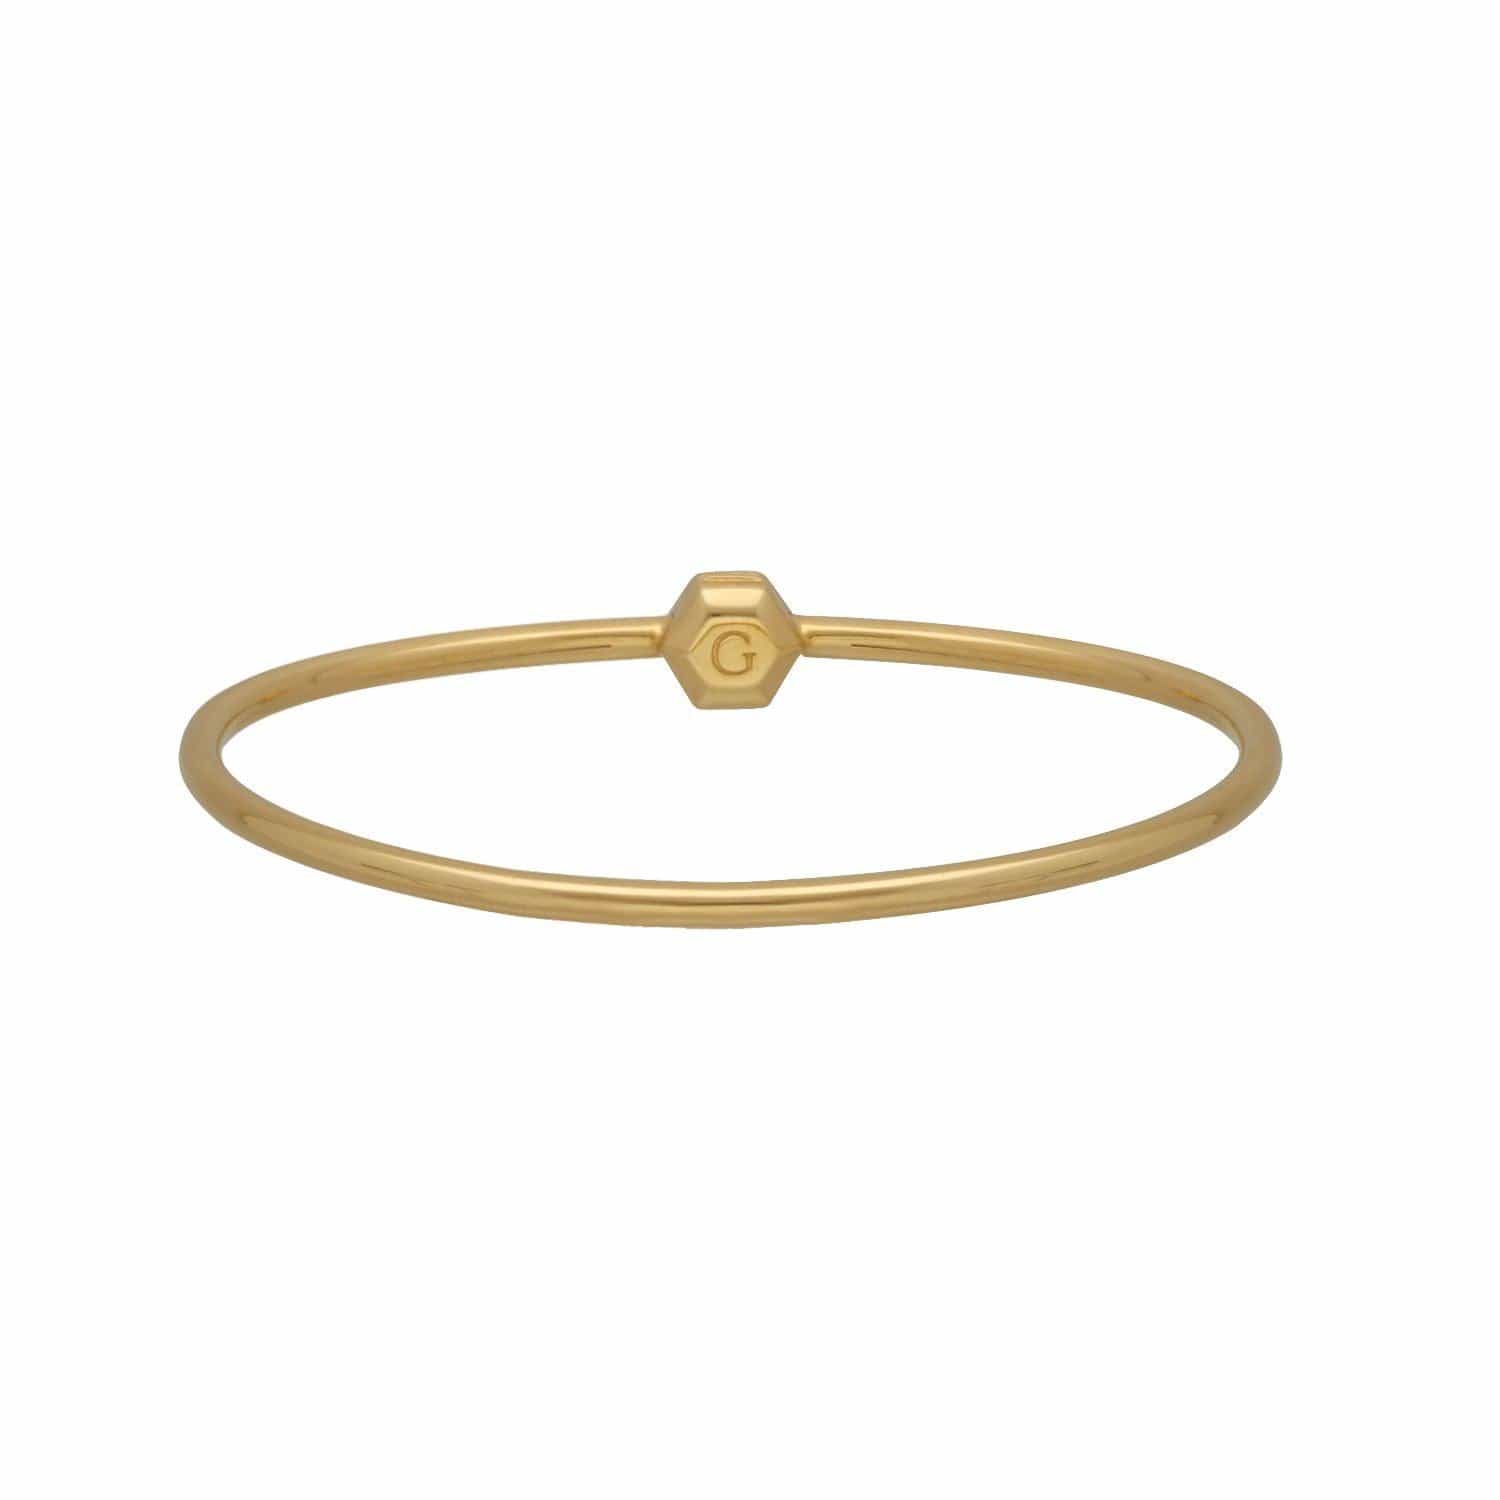 HS Achievement Bangle in gold plated sterling silver size large 1